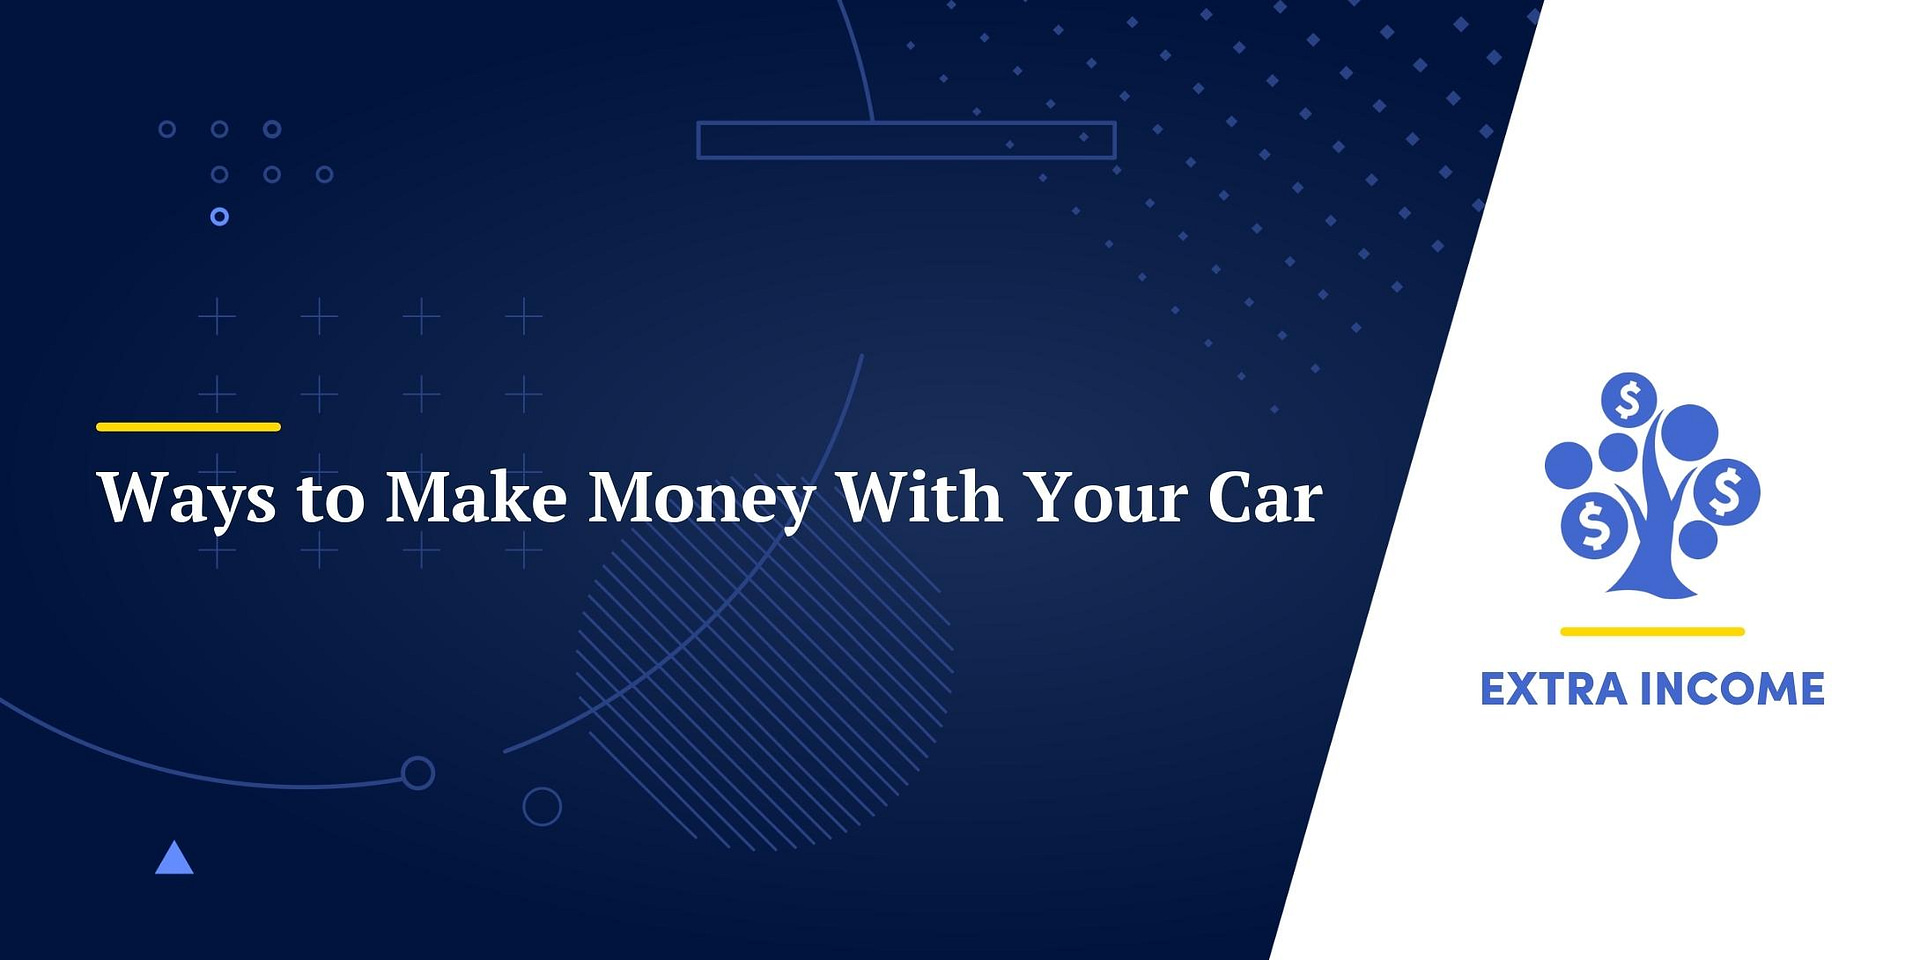 8 Ways To Make Money With Your Car